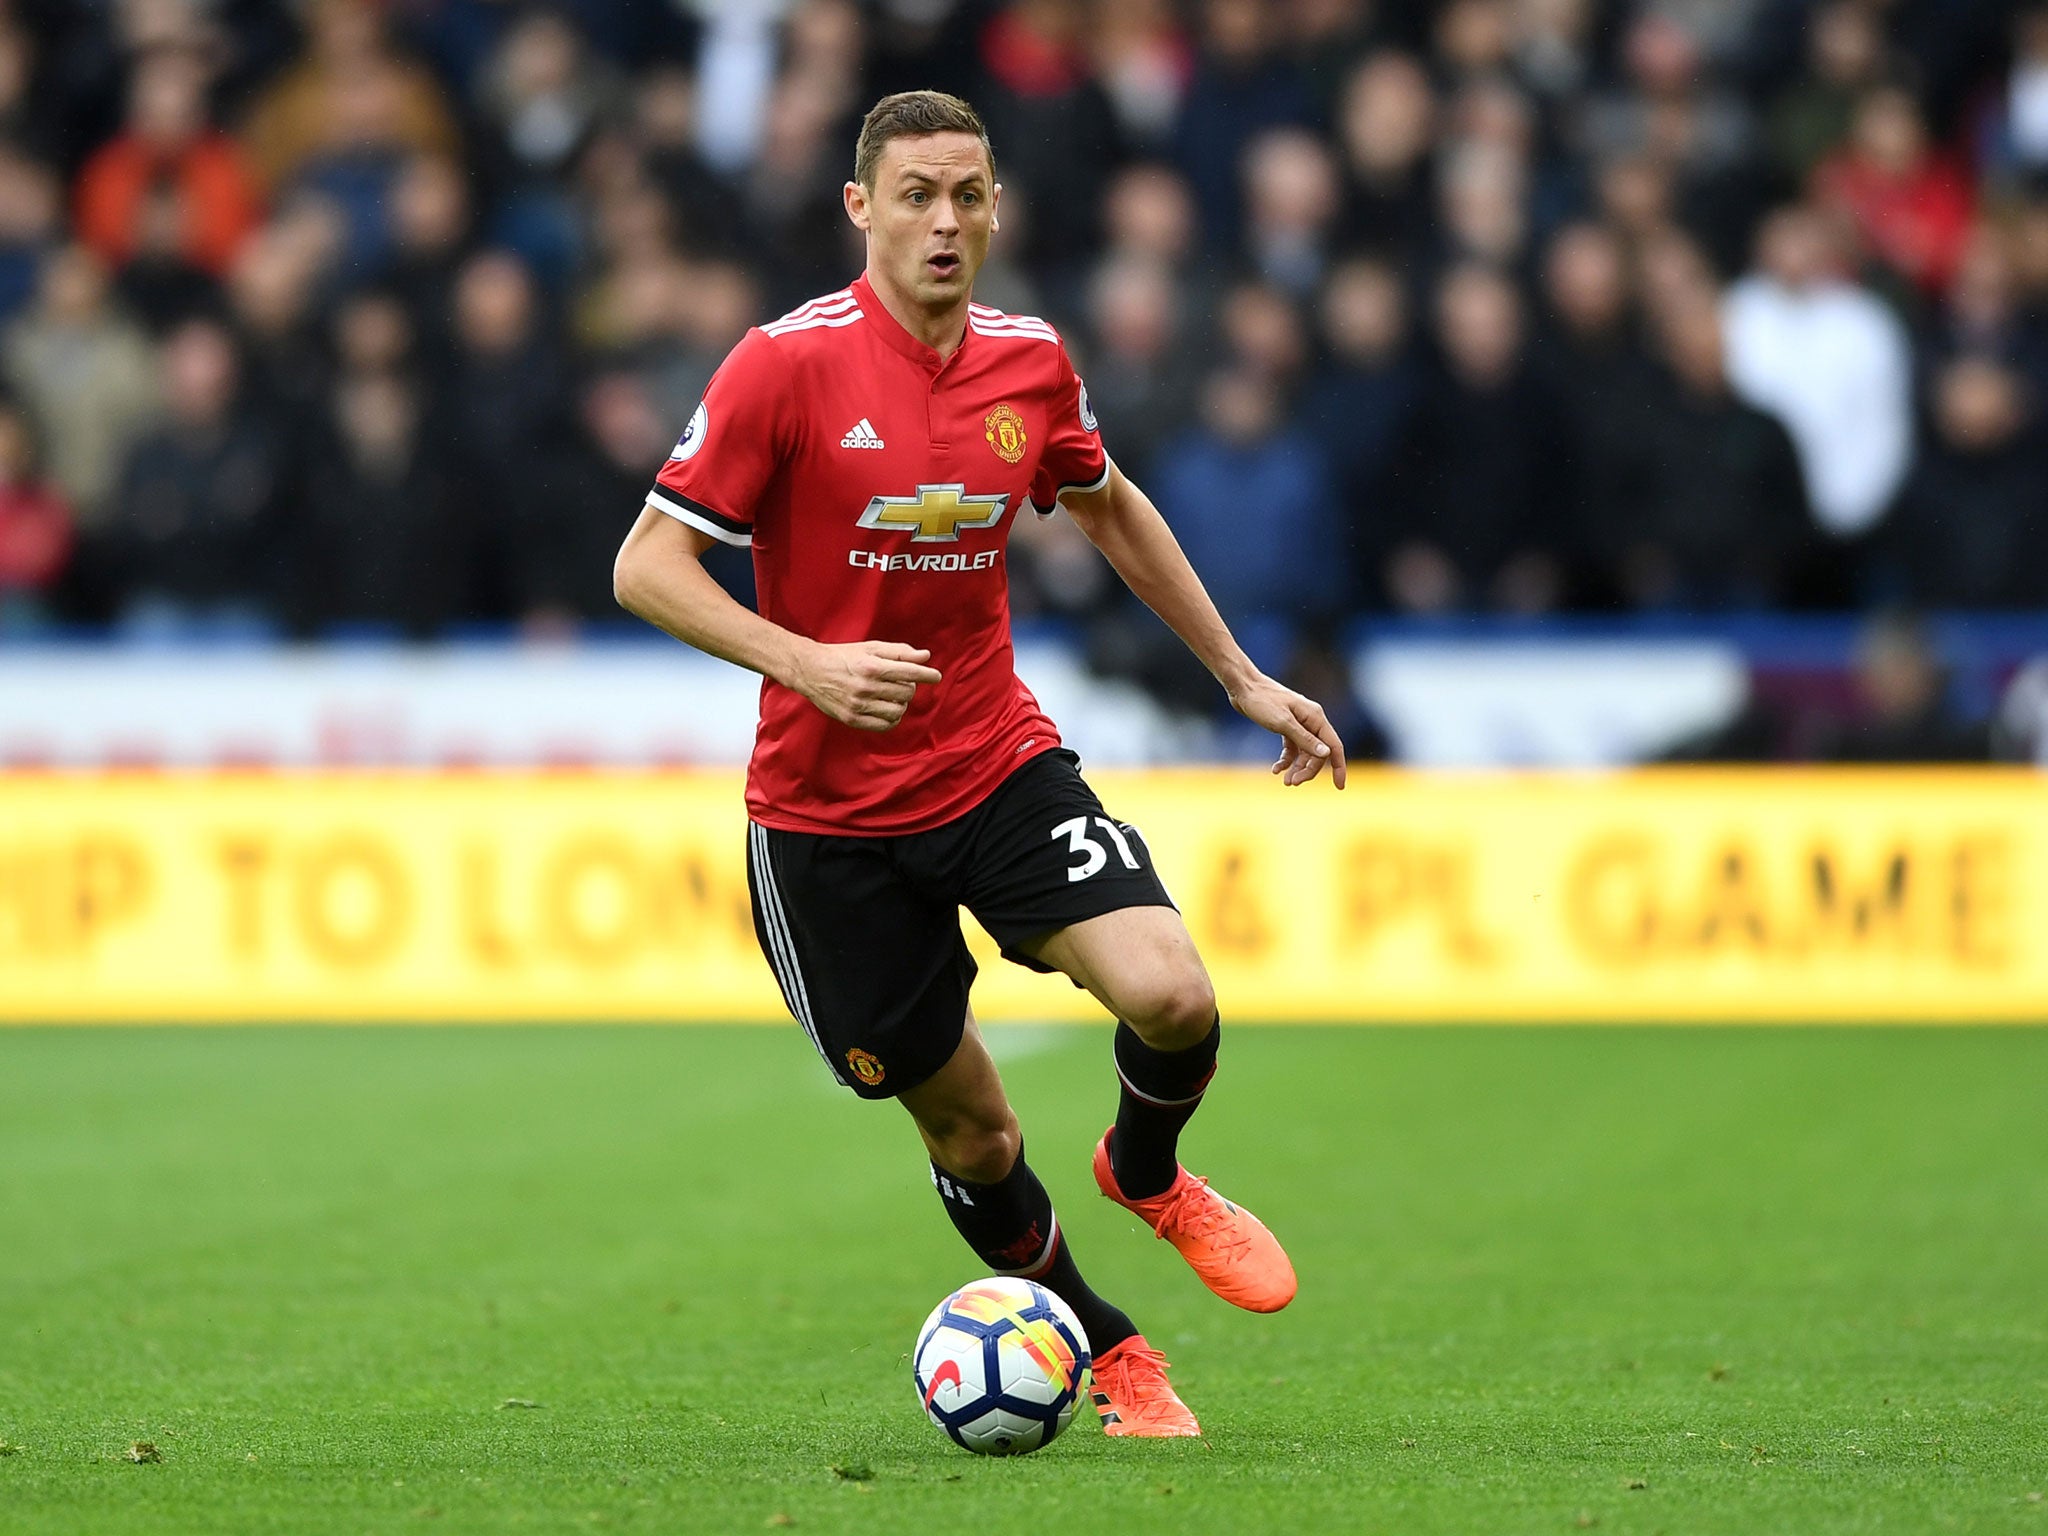 Matic has been superb for United in recent weeks